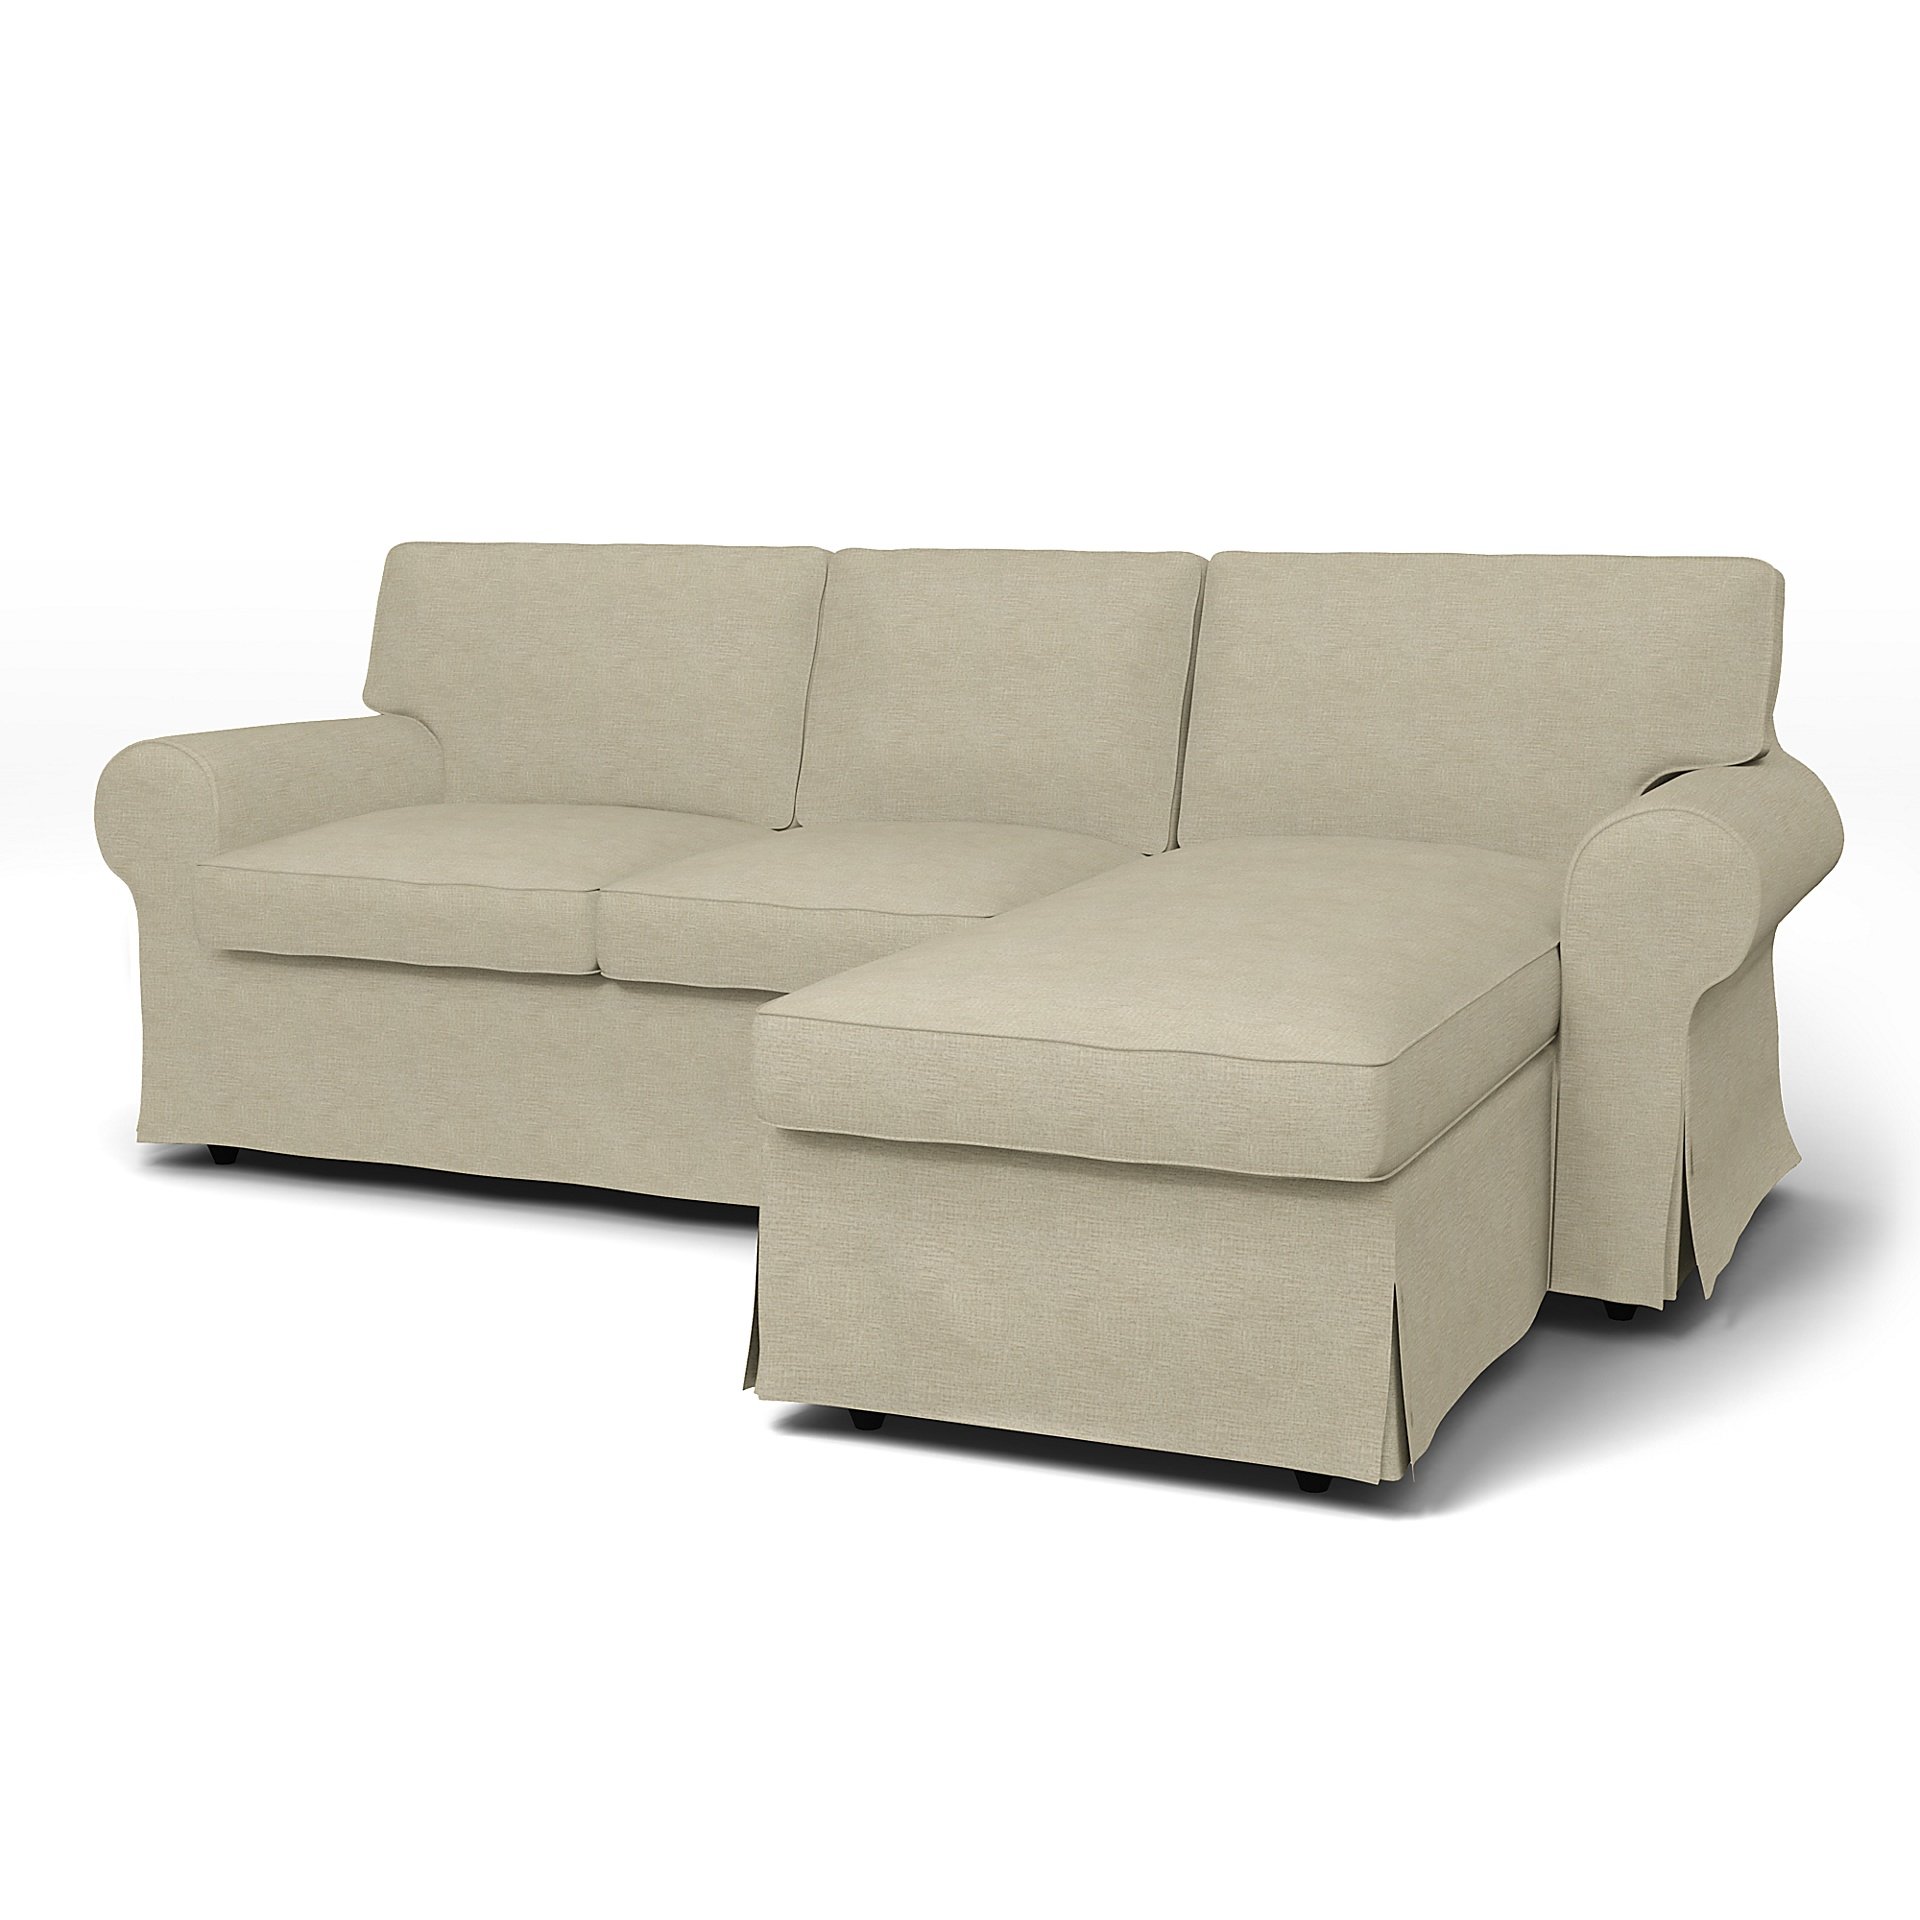 IKEA - Ektorp 3 Seater Sofa with Chaise Cover, Soft White, Boucle & Texture - Bemz